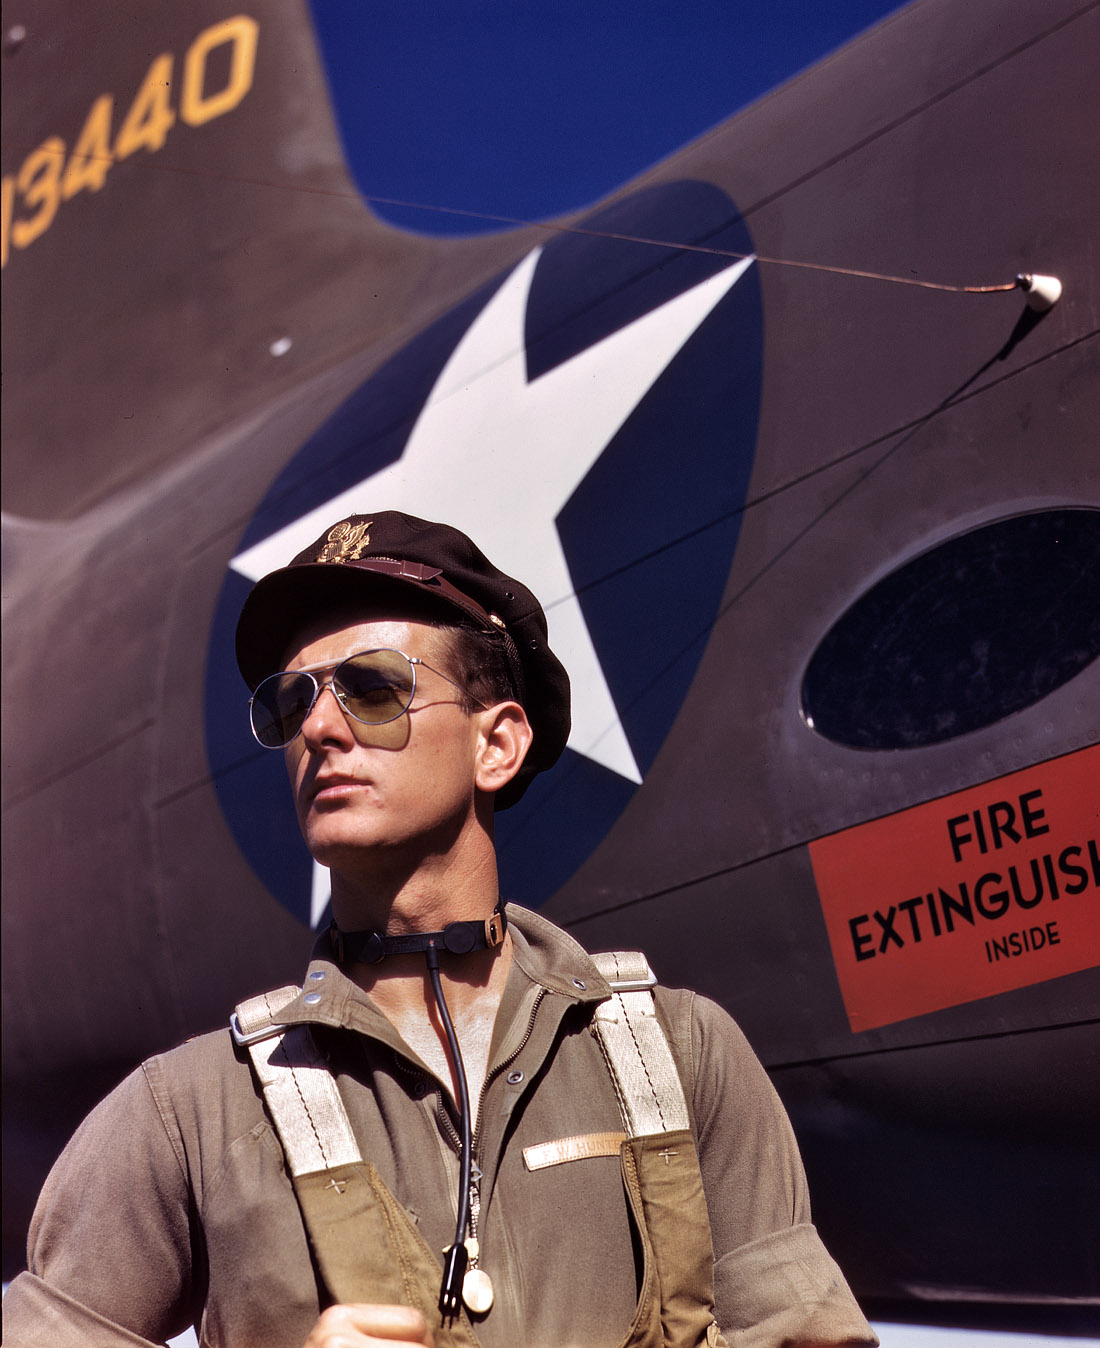 October 1942. F.W. Hunter, Army test pilot, at the Douglas Aircraft plant in Long Beach, Calif. View full size. 4x5 Kodachrome transparency by Alfred Palmer.